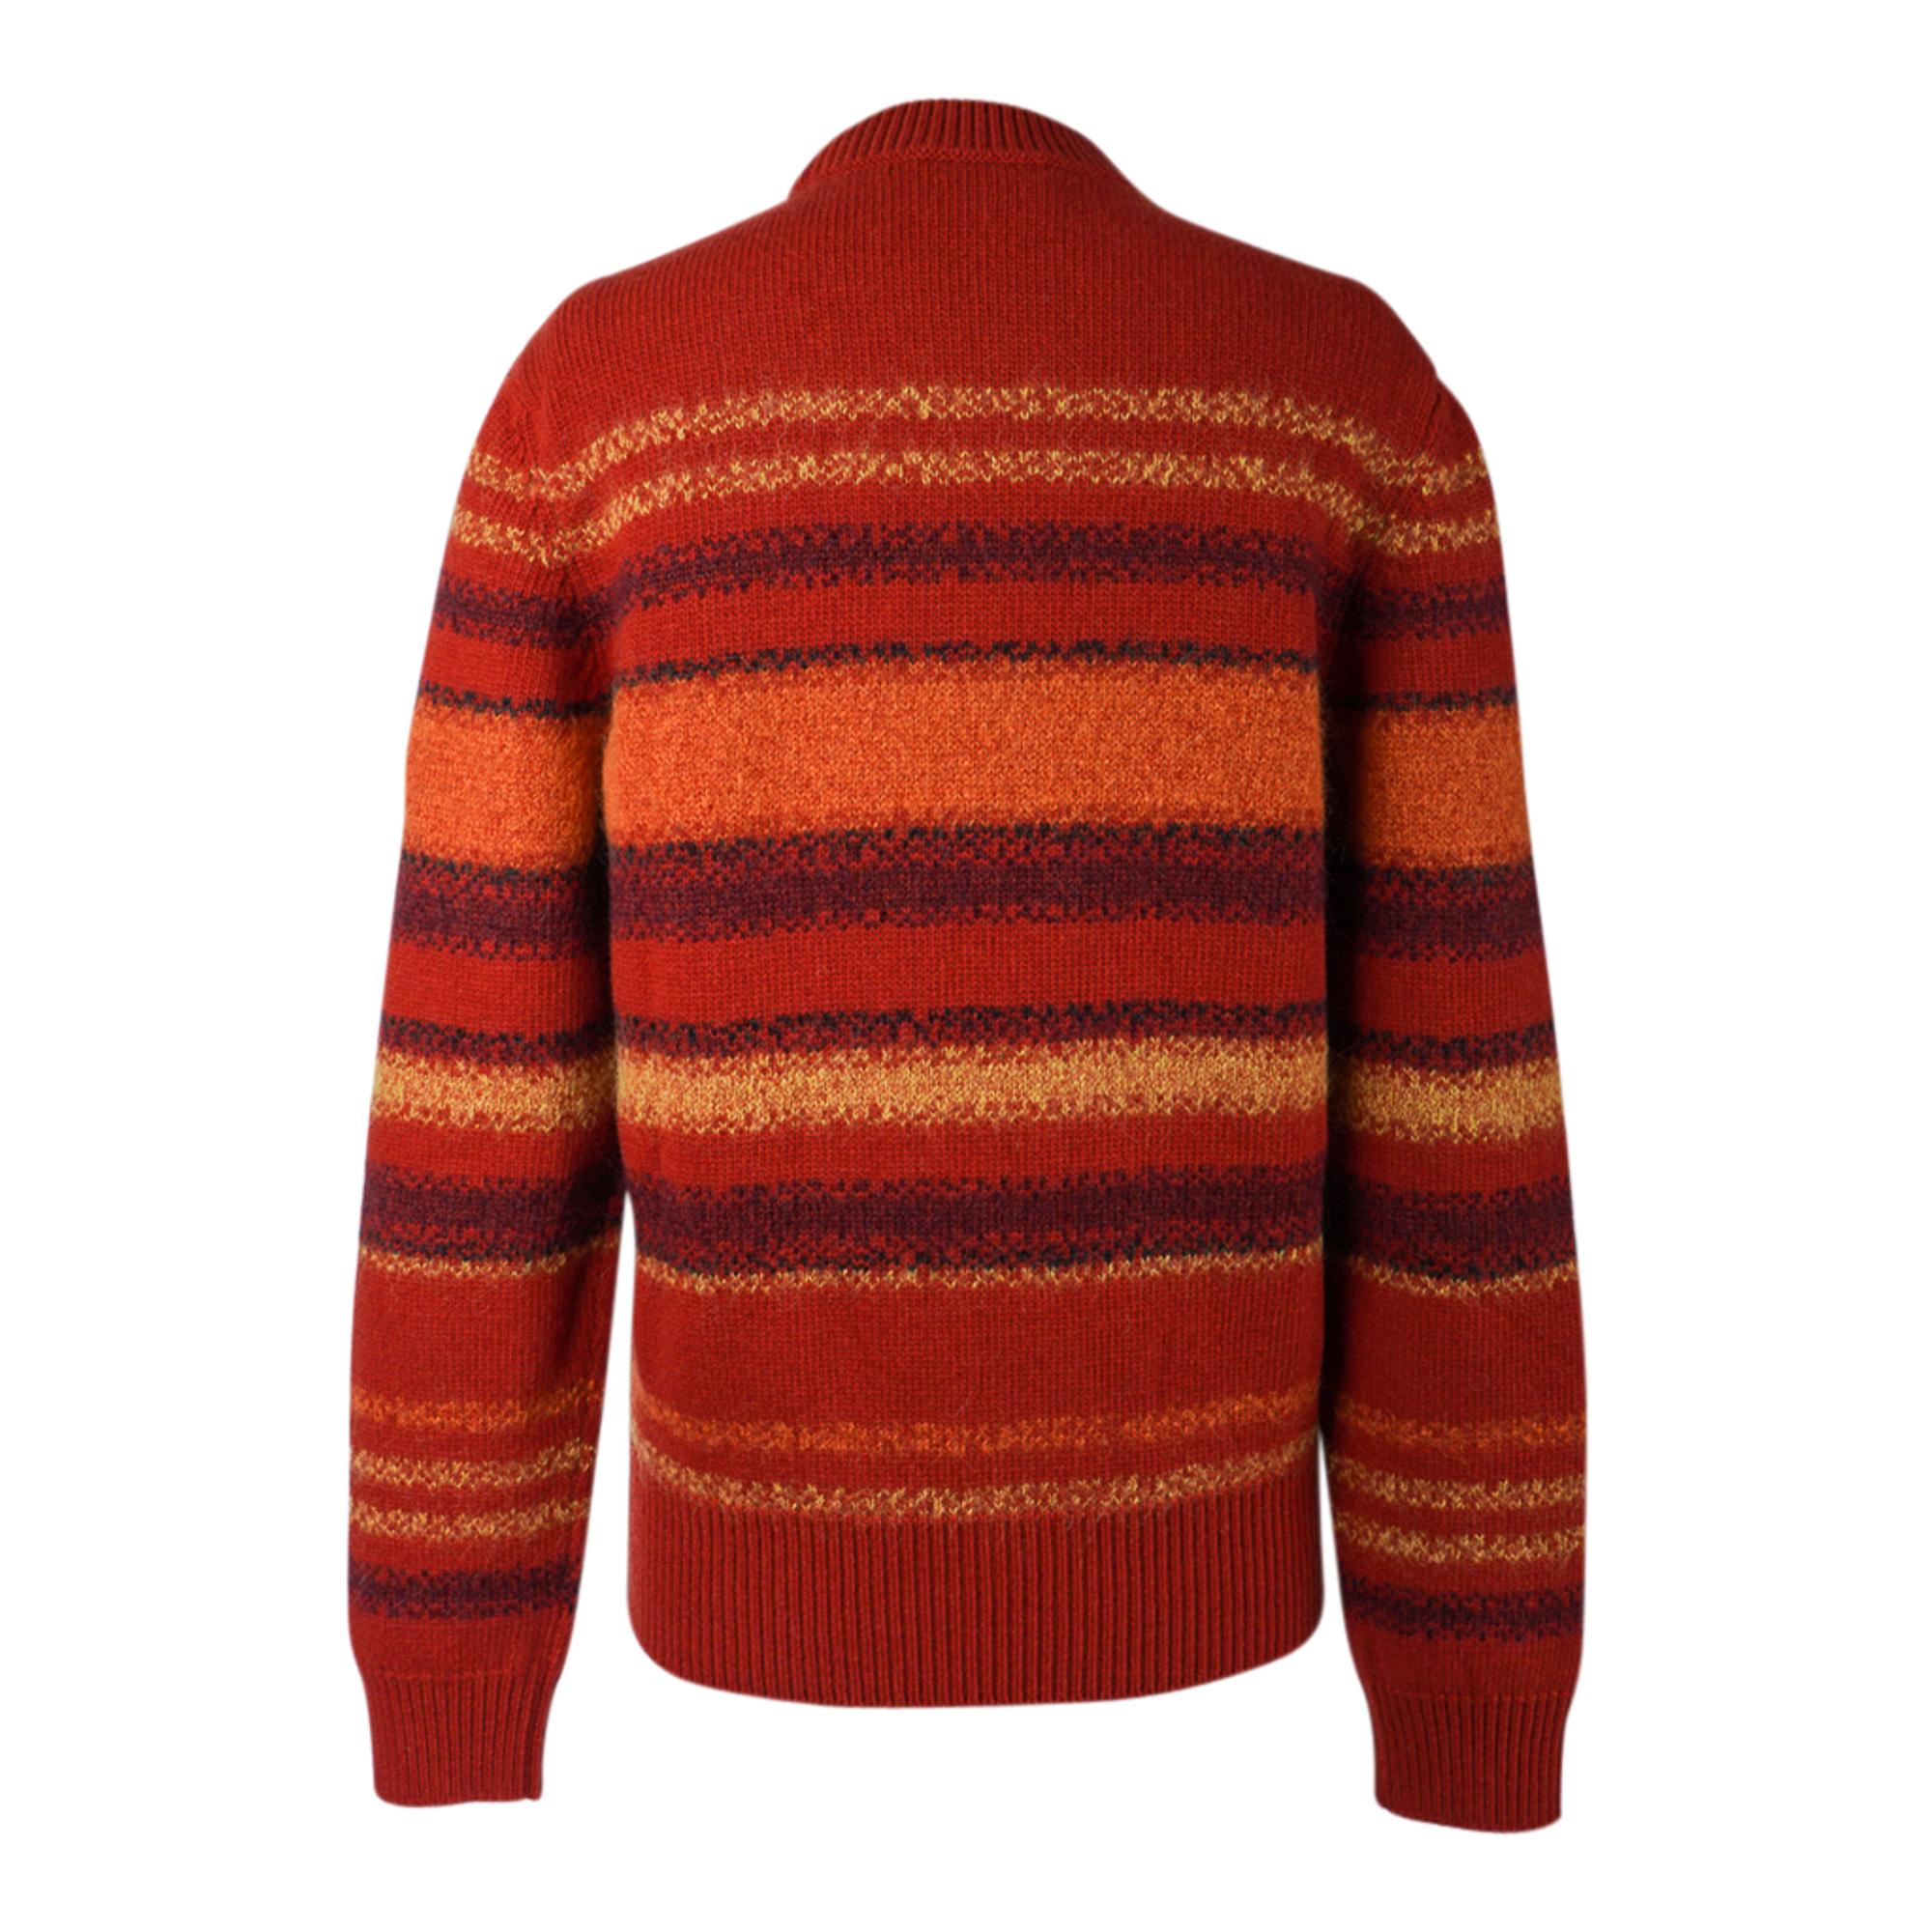 Hermes Men's Sweater Rayures Fondues (Melted Stripes) Orange Brulee Wool M In New Condition For Sale In Miami, FL